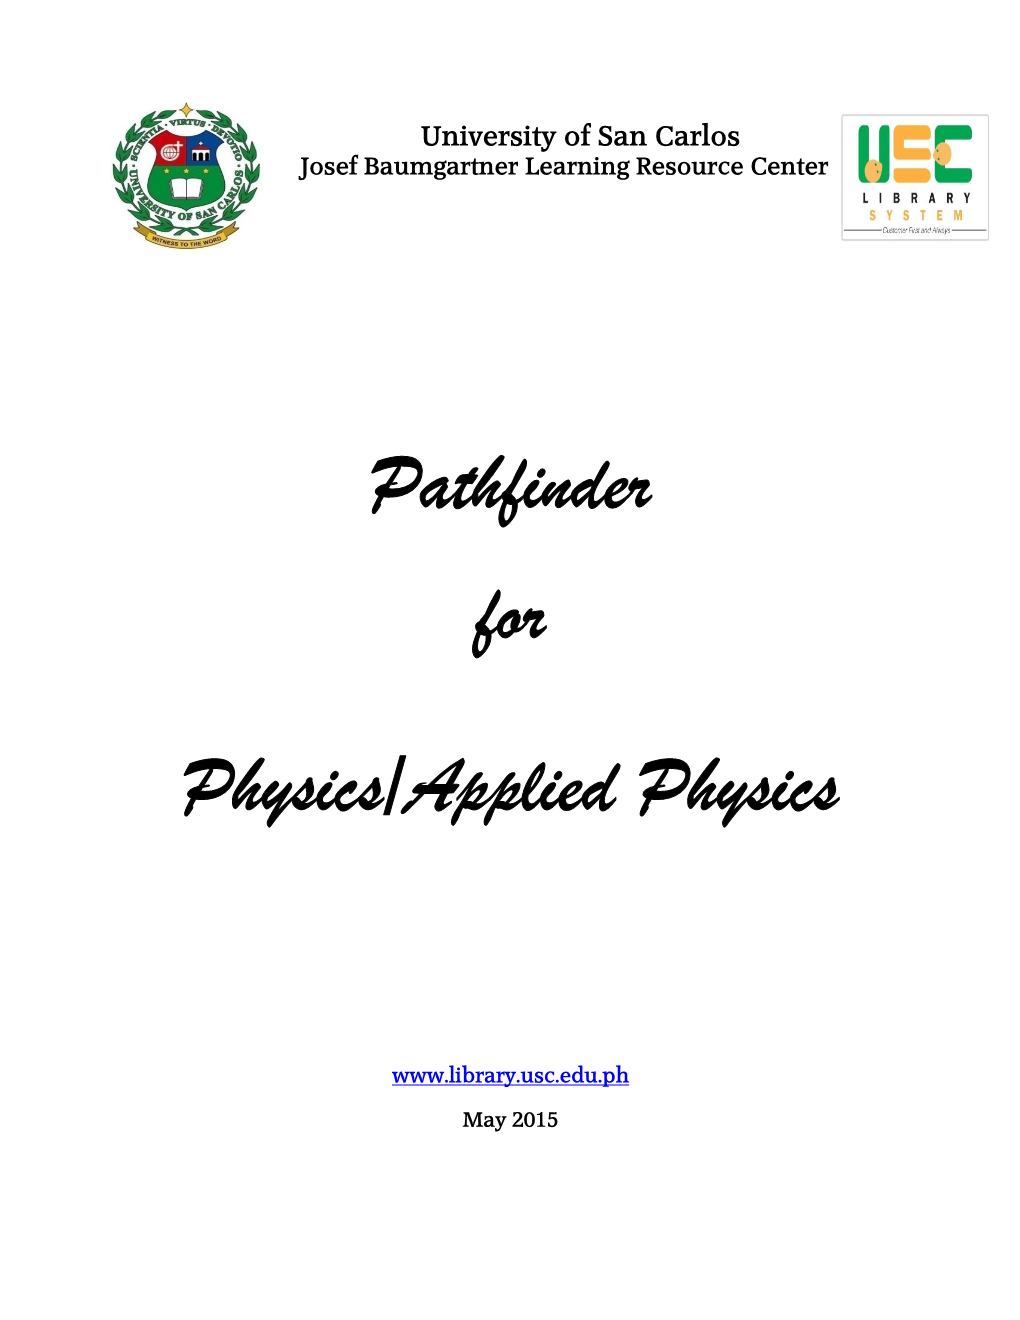 Pathfinder for Physics/Applied Physics